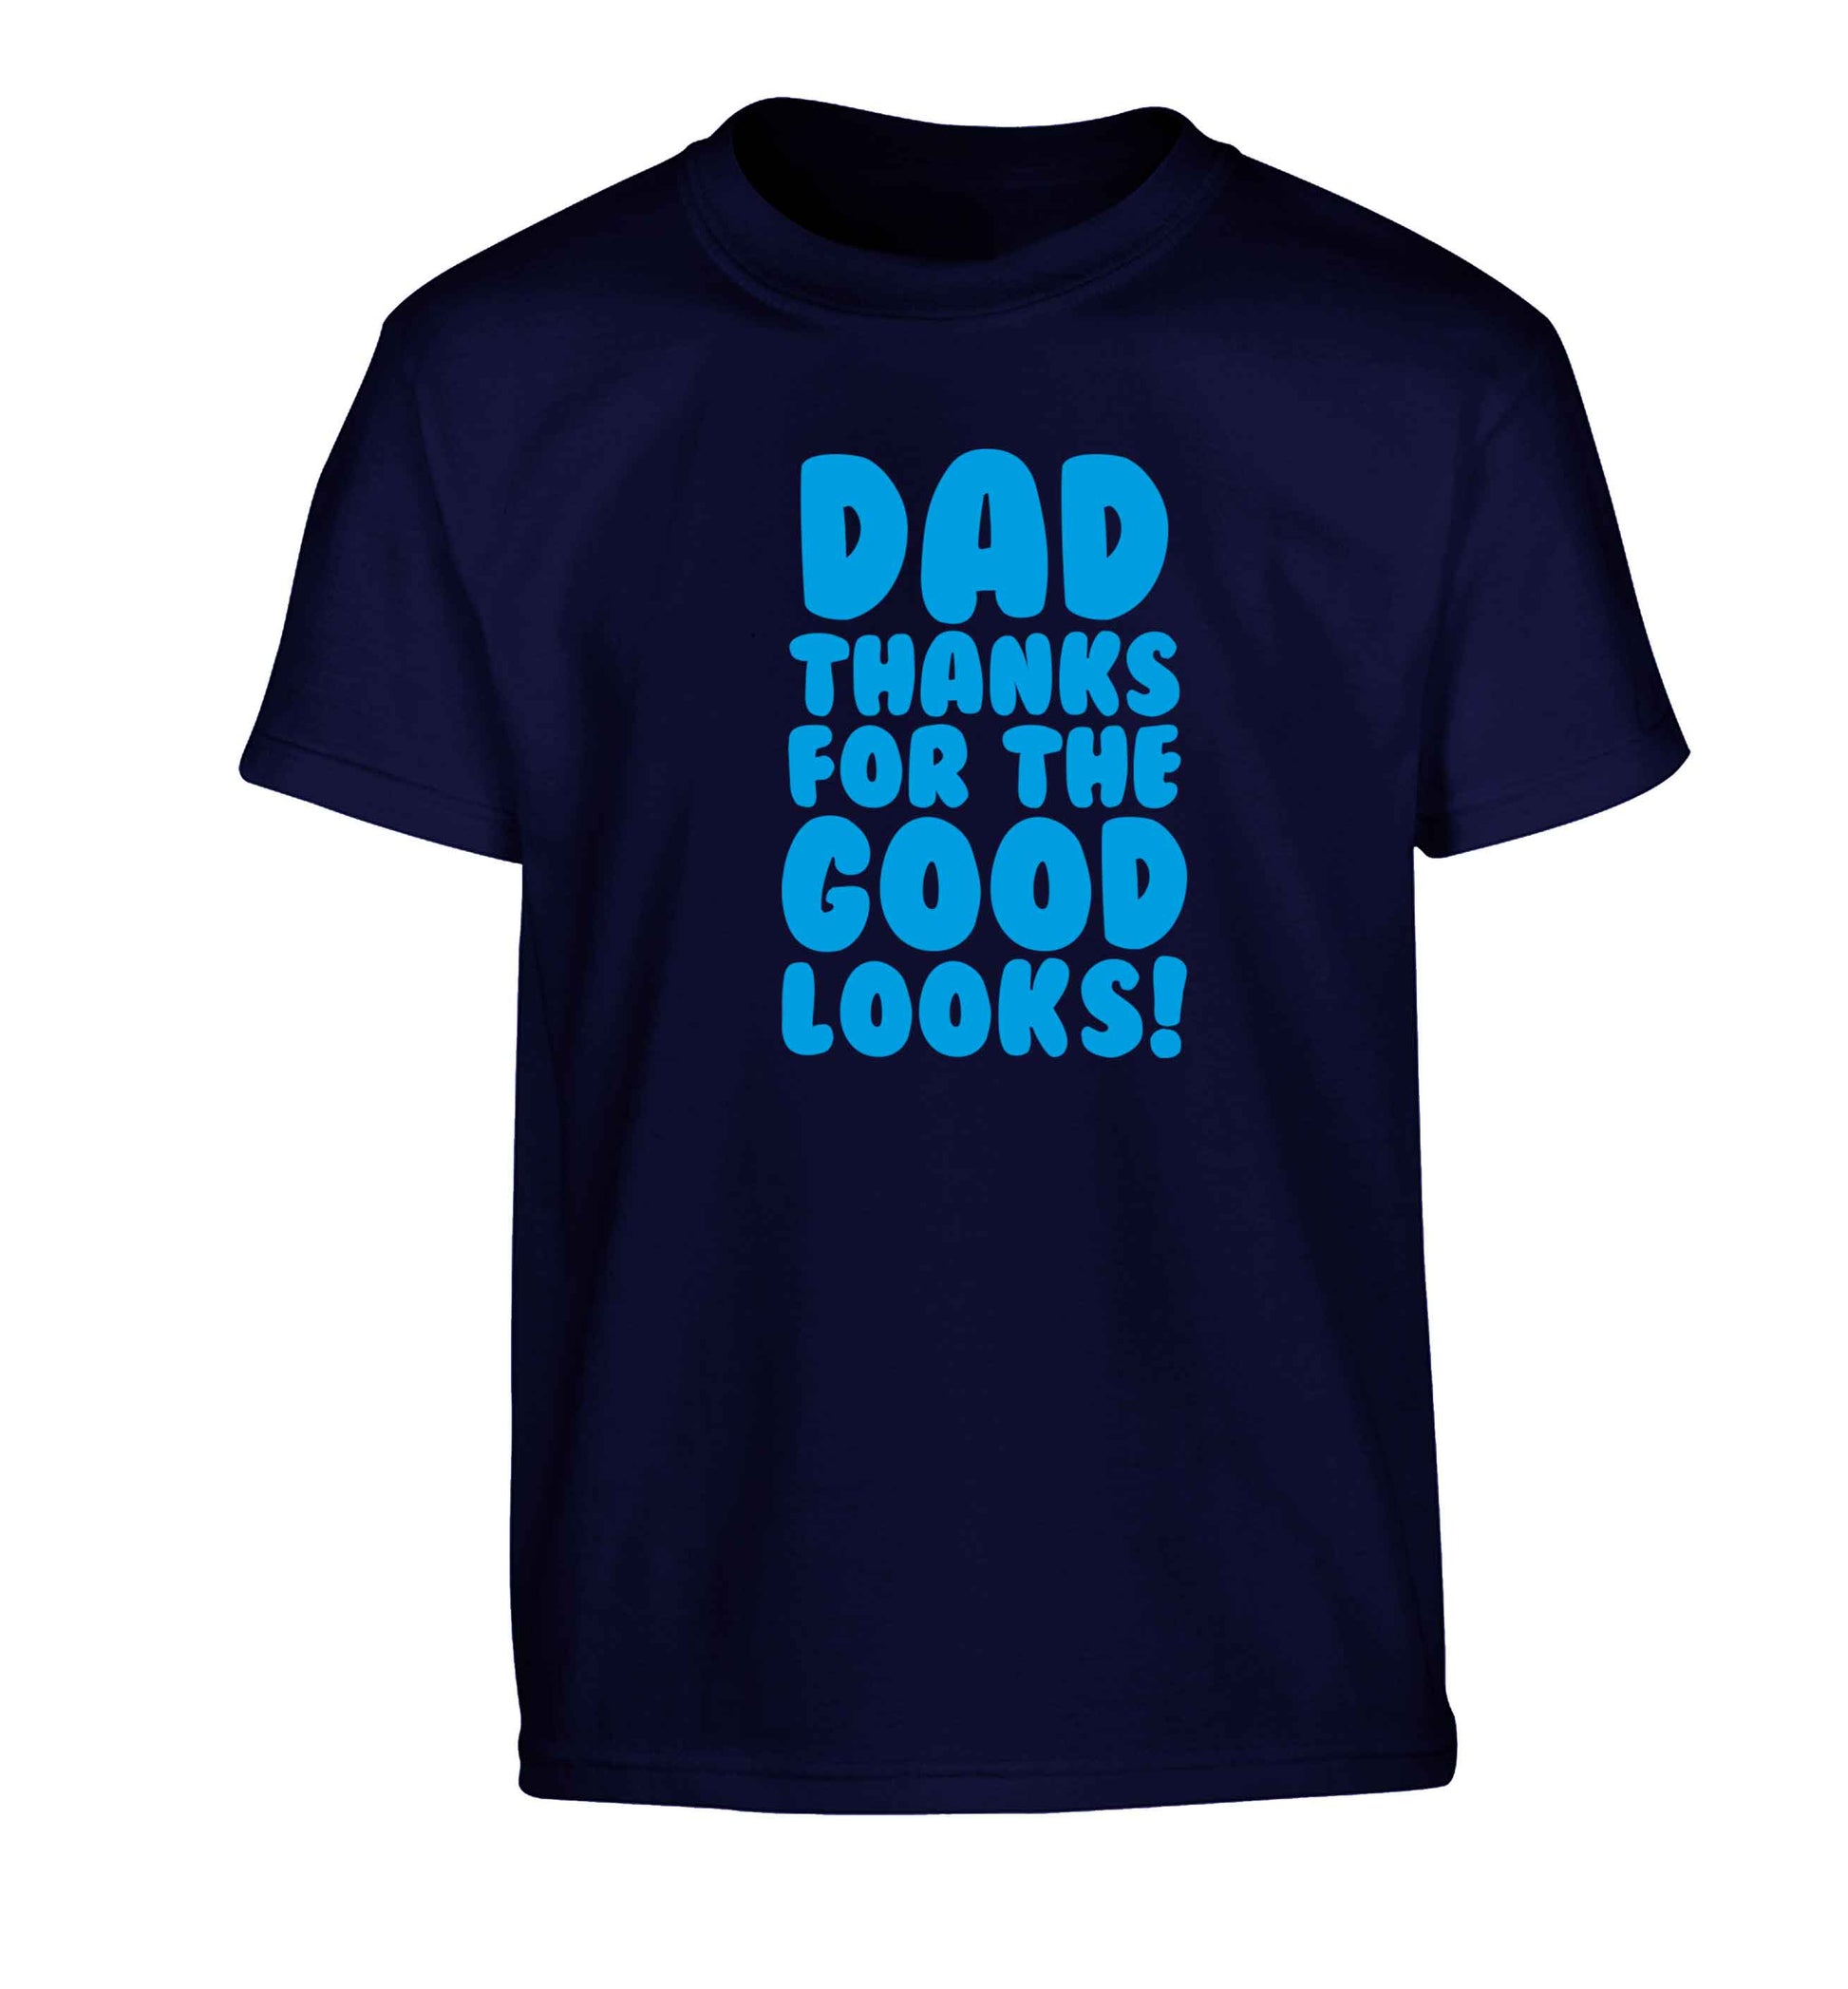 Dad thanks for the good looks Children's navy Tshirt 12-13 Years